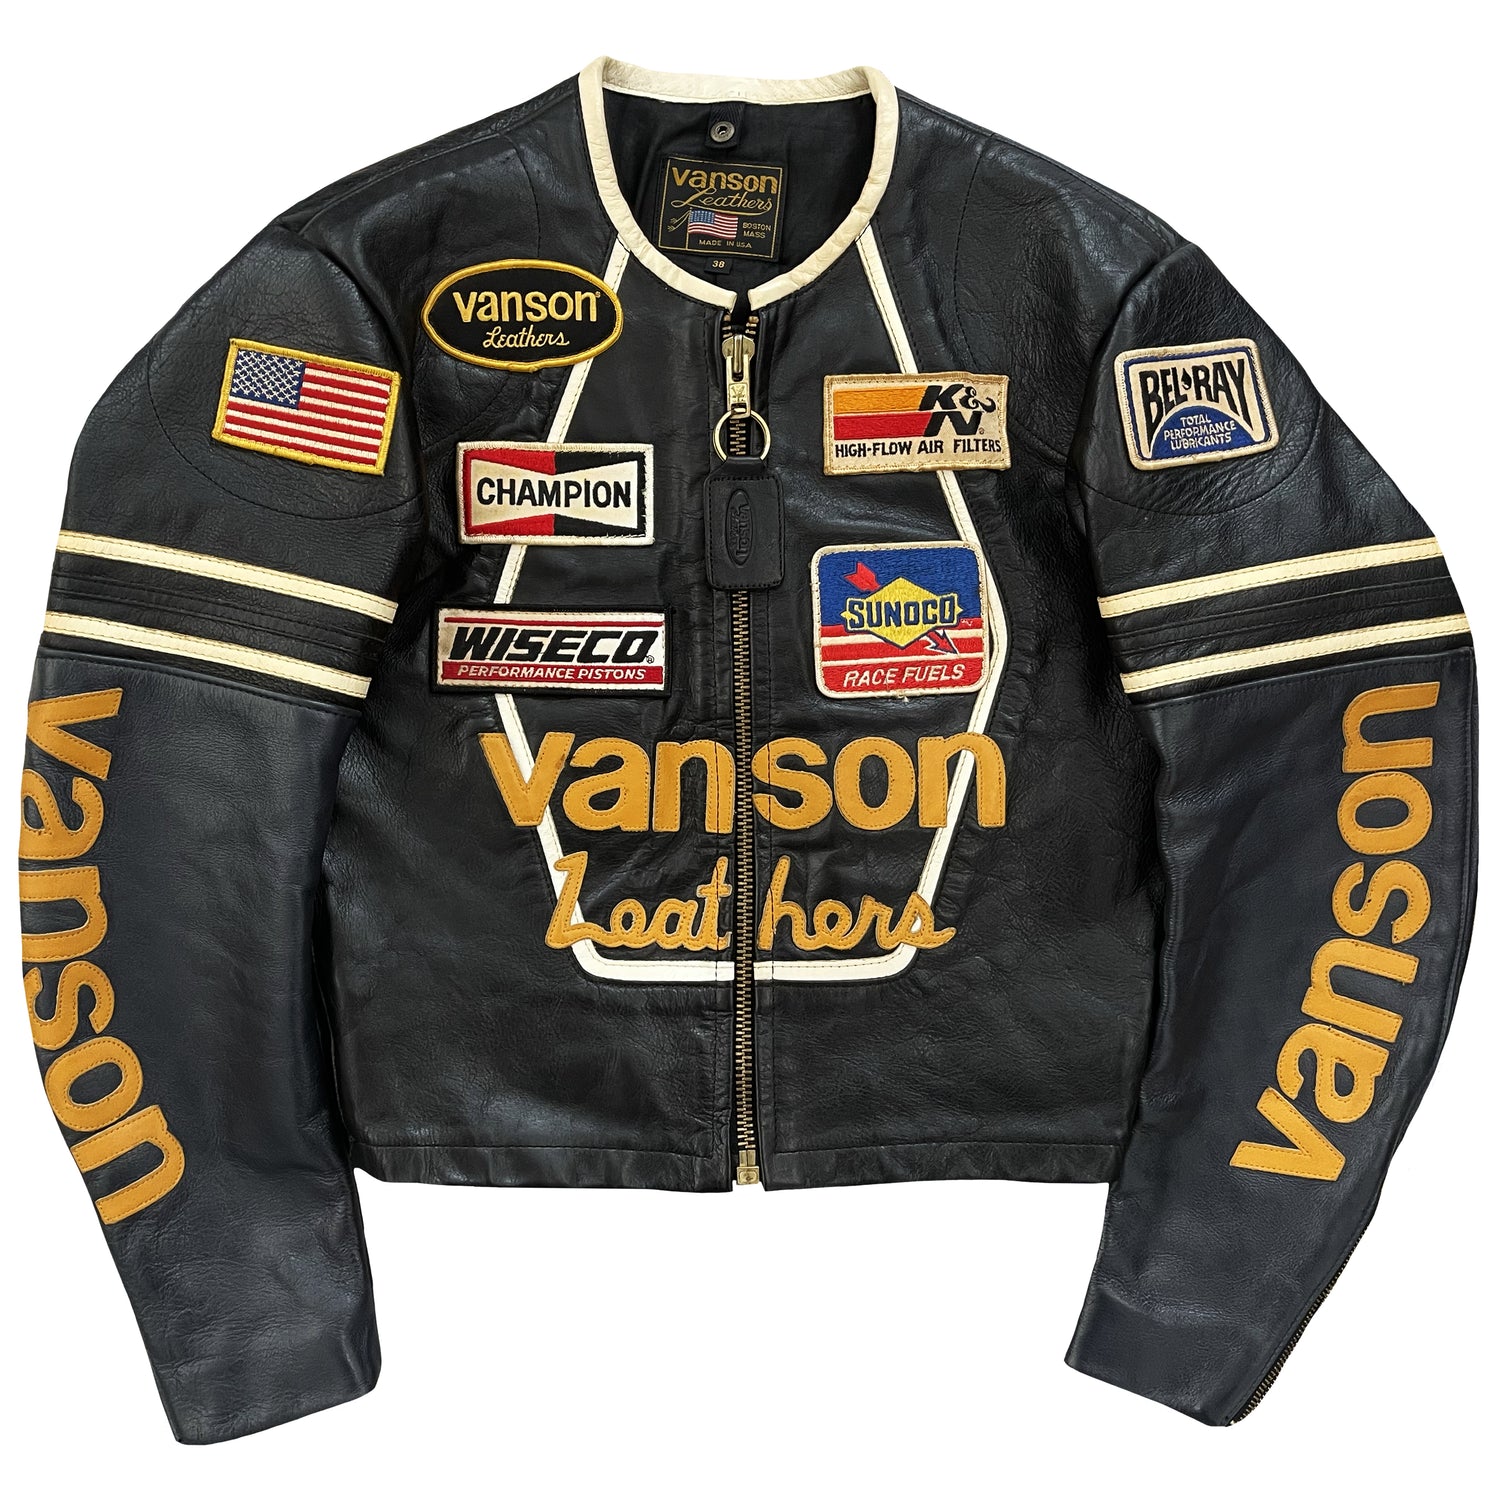 Indian Motorcycle Varsity Jacket – The Holy Grail